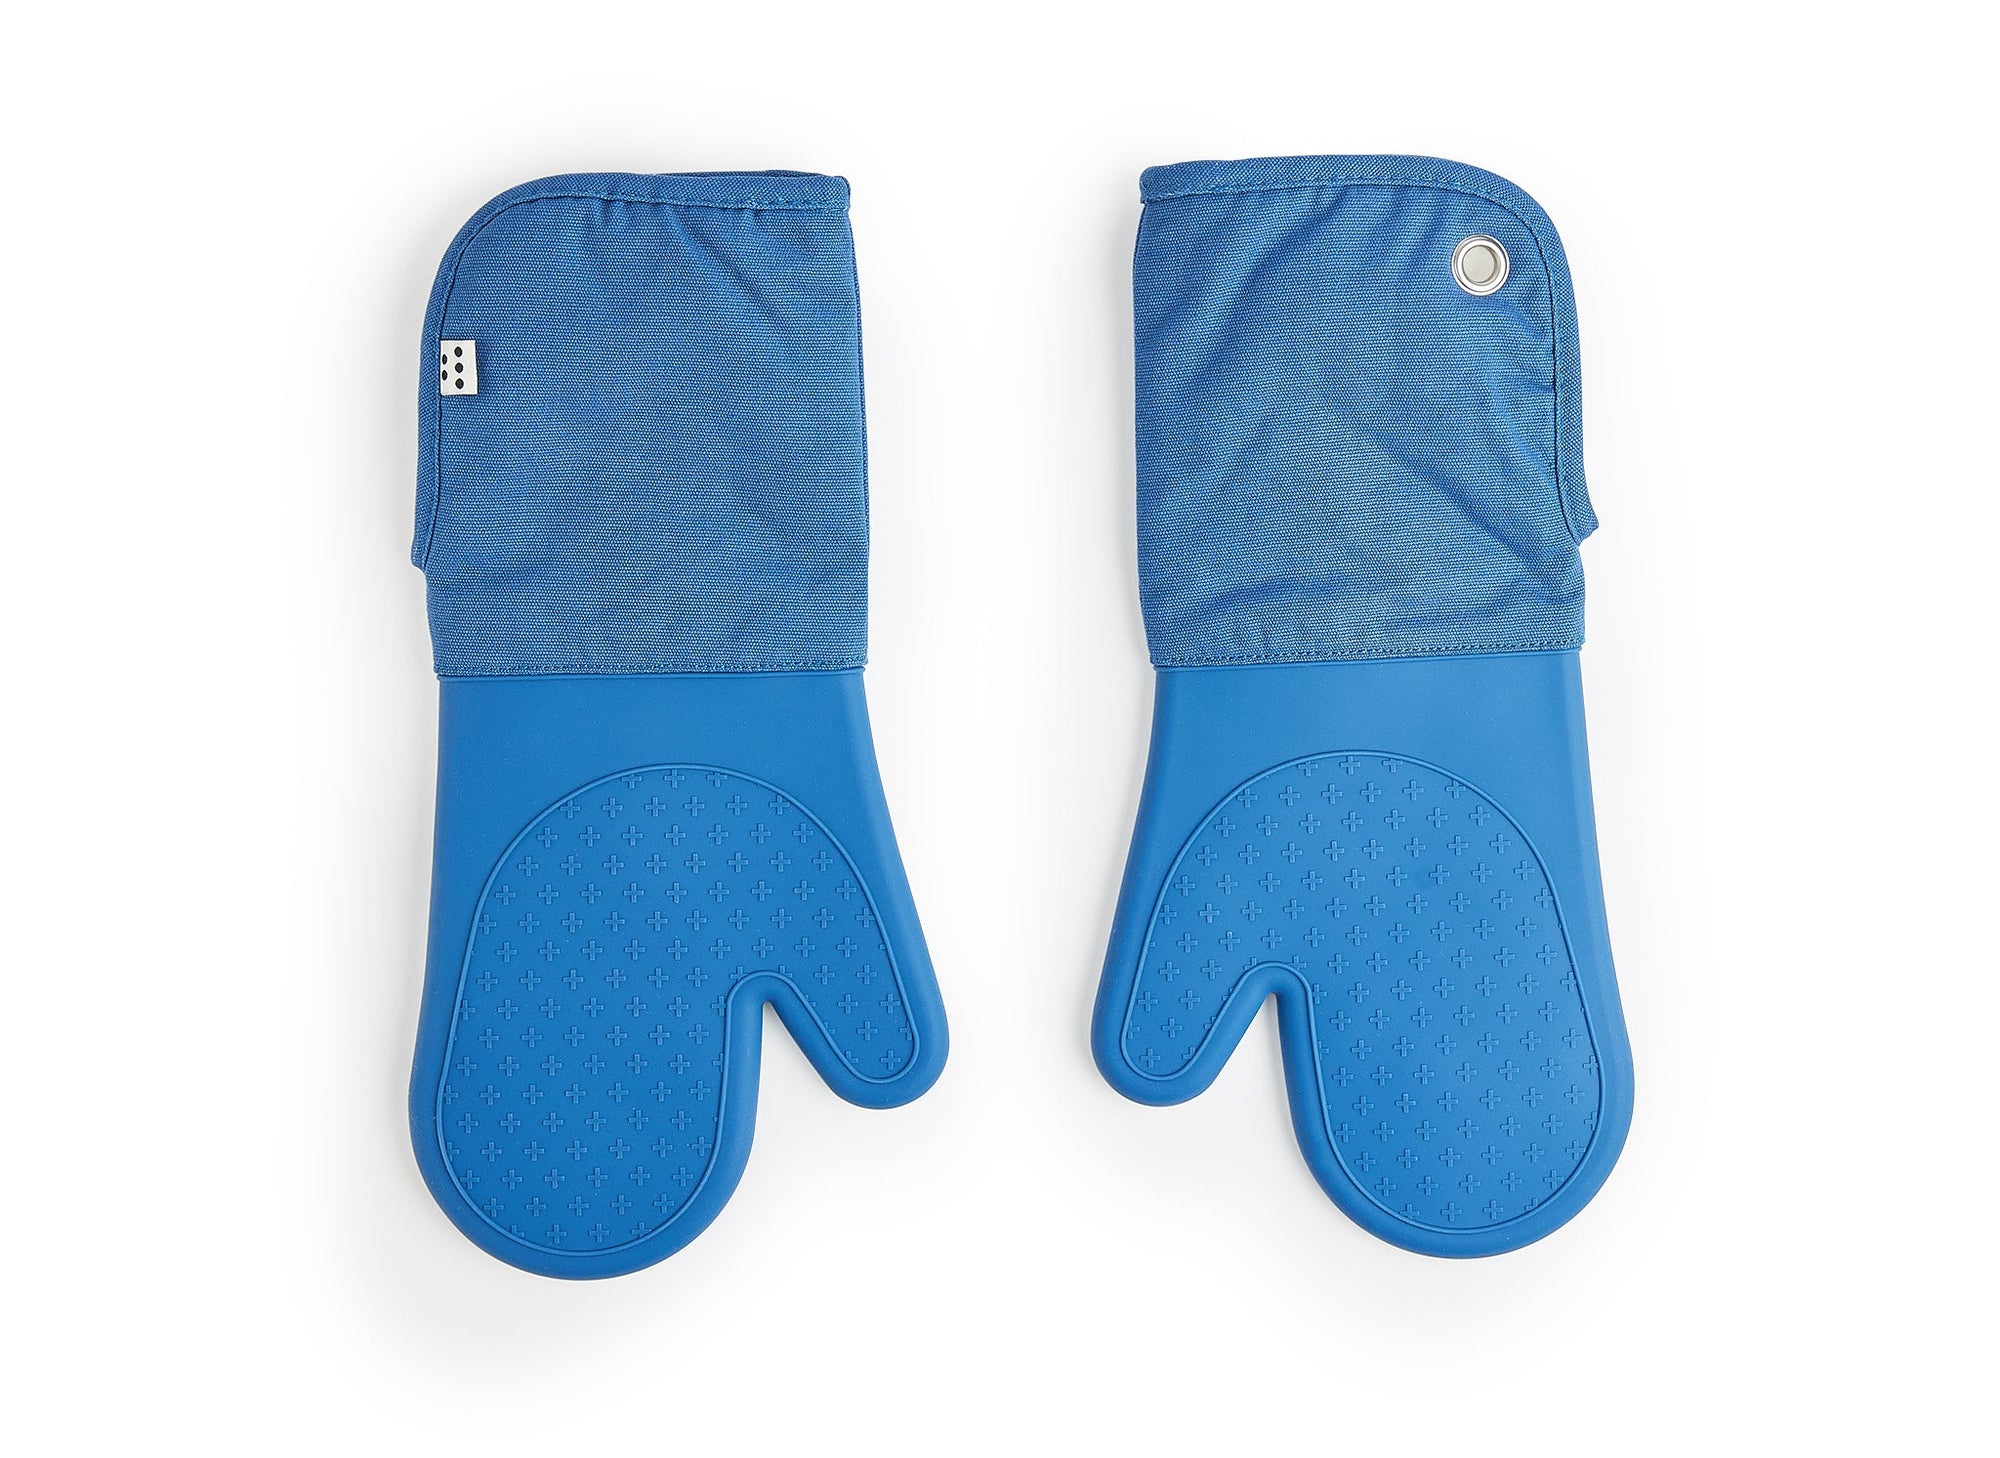 A bird’s eye view of two Misen Oven Mitts next to each other on a white background. The cloth base, silicone-gripped hands and easy-entry design are all clearly visible.